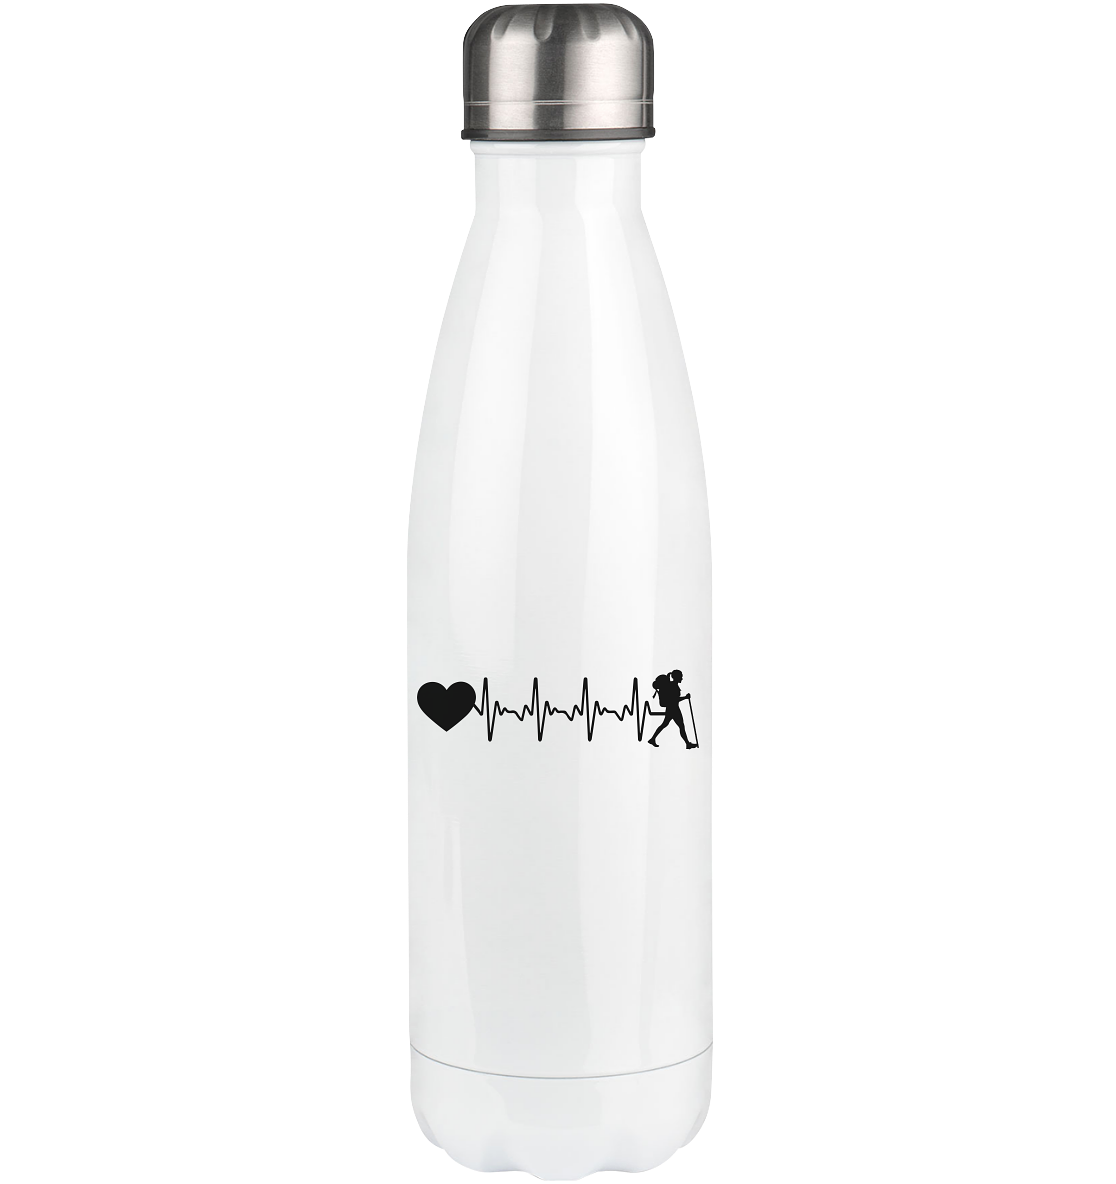 Heartbeat Heart and Hiking - Edelstahl Thermosflasche wandern 500ml